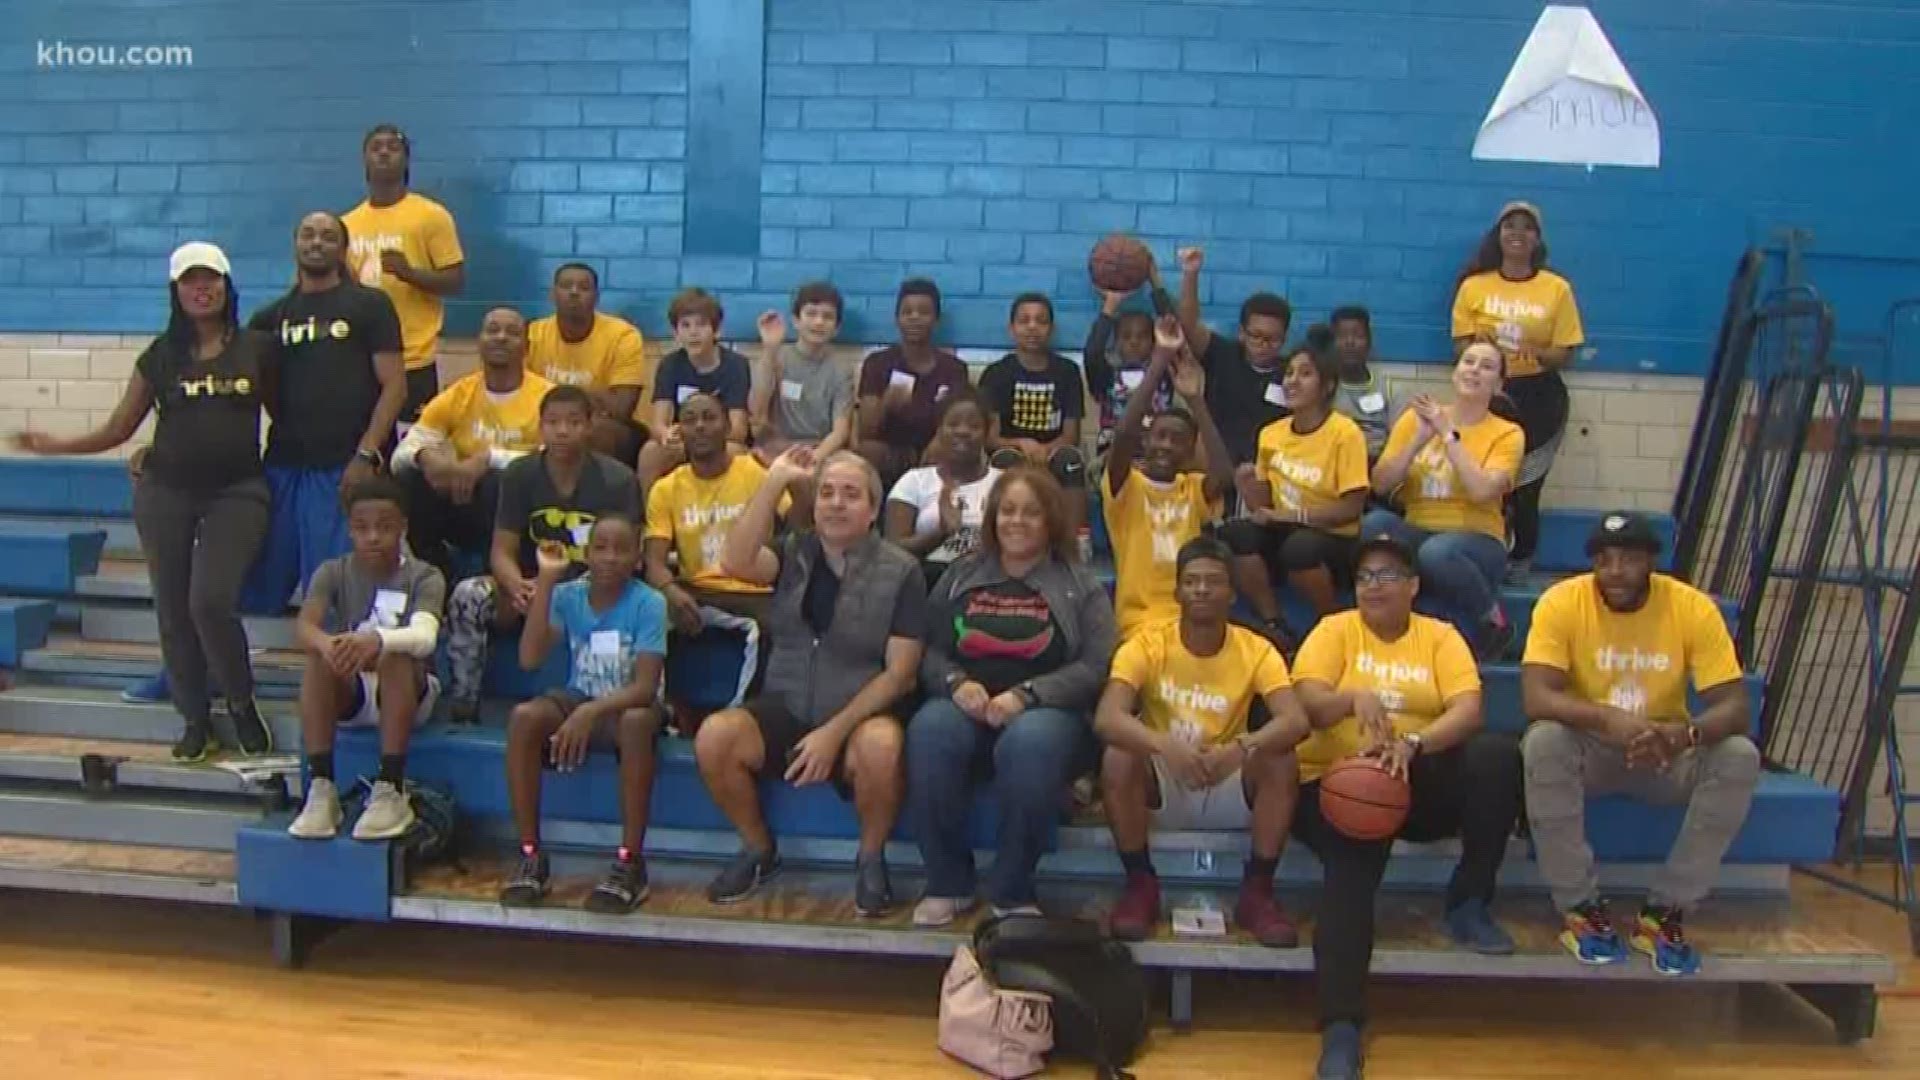 Young basketball players took part in a skills challenge at Attucks Middle School that paid tribute to Kobe Bryant.